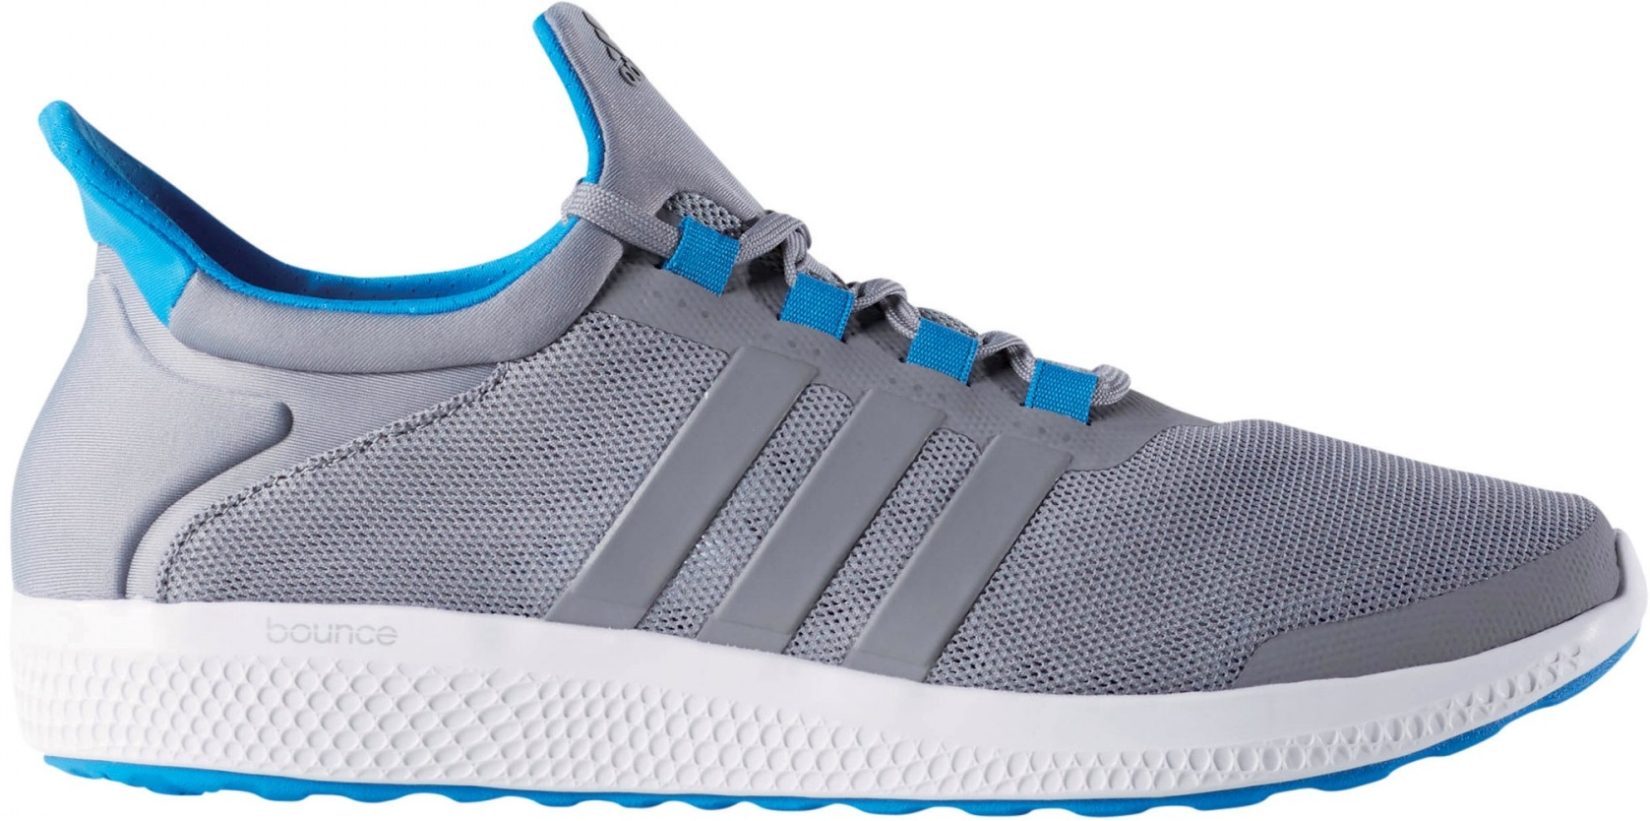 Only $52 + Review of Adidas Climachill Sonic Boost | RunRepeat